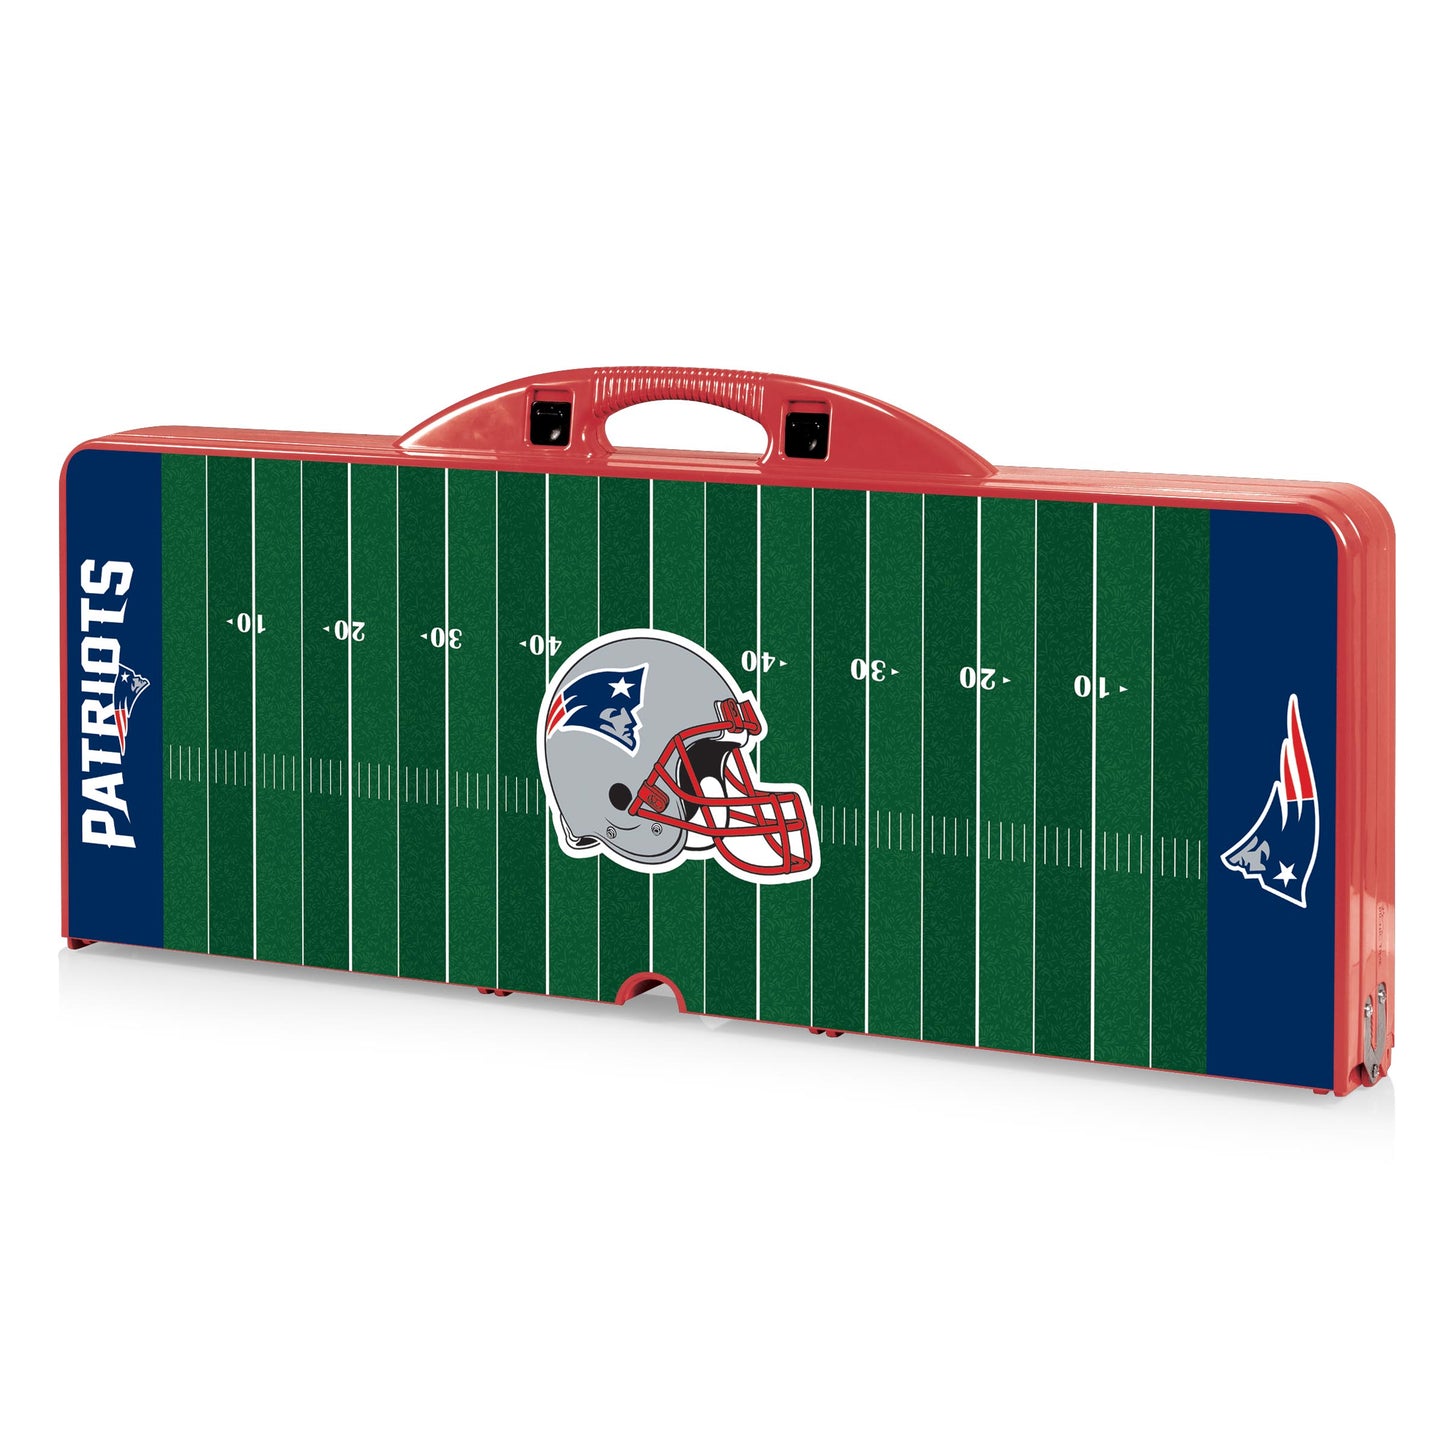 New England Patriots - Picnic Table Portable Folding Table with Seats and Umbrella